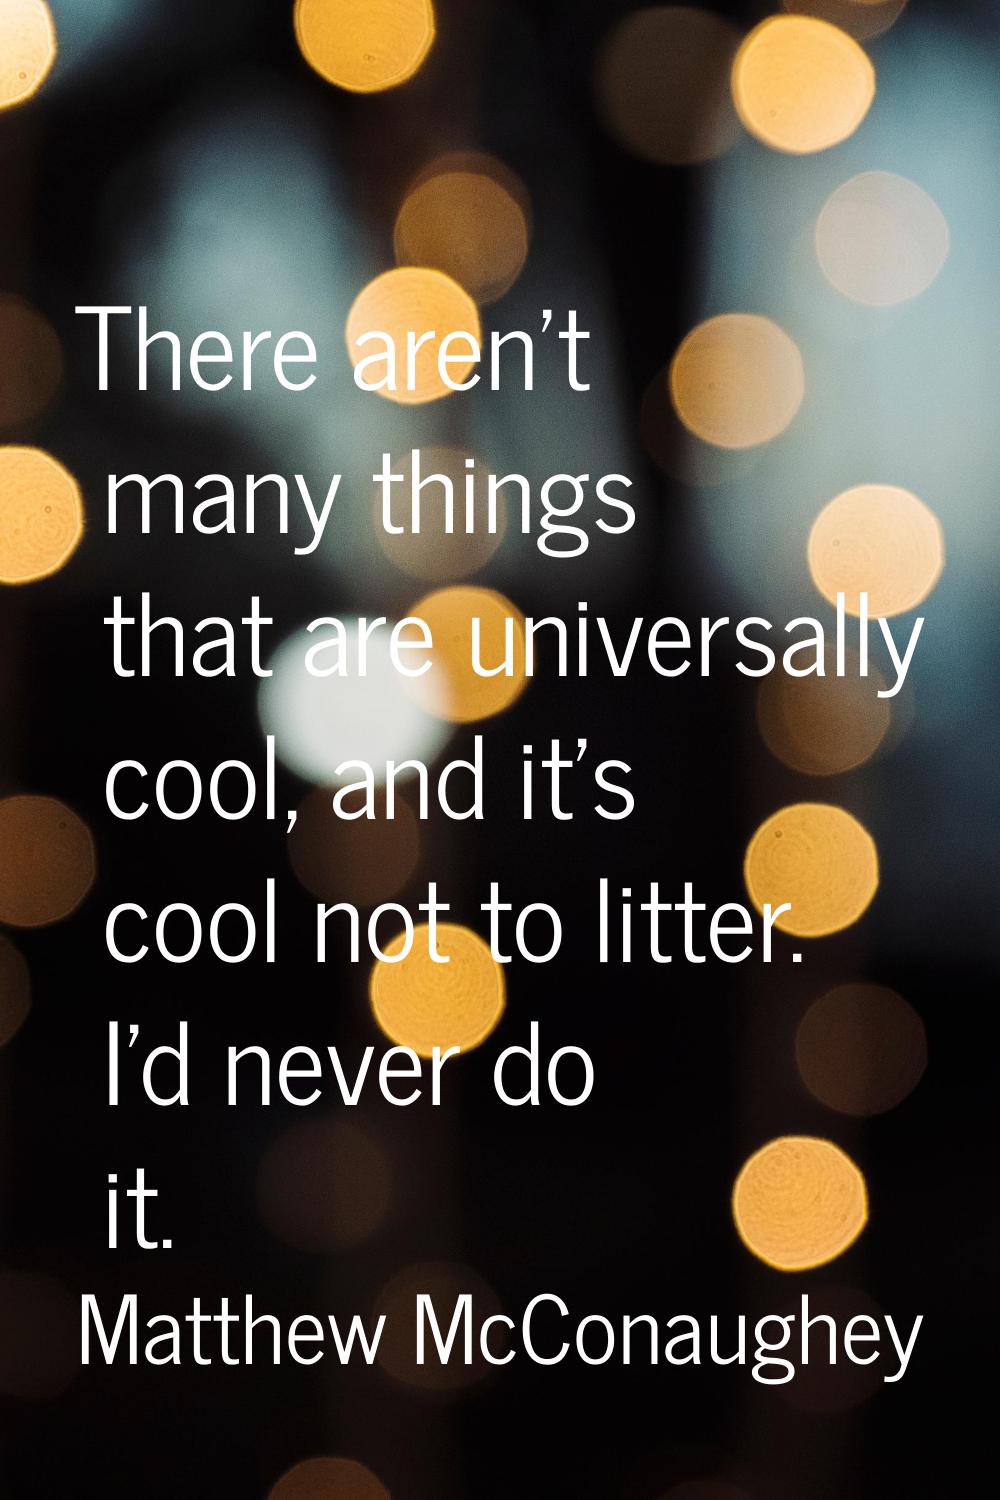 There aren't many things that are universally cool, and it's cool not to litter. I'd never do it.